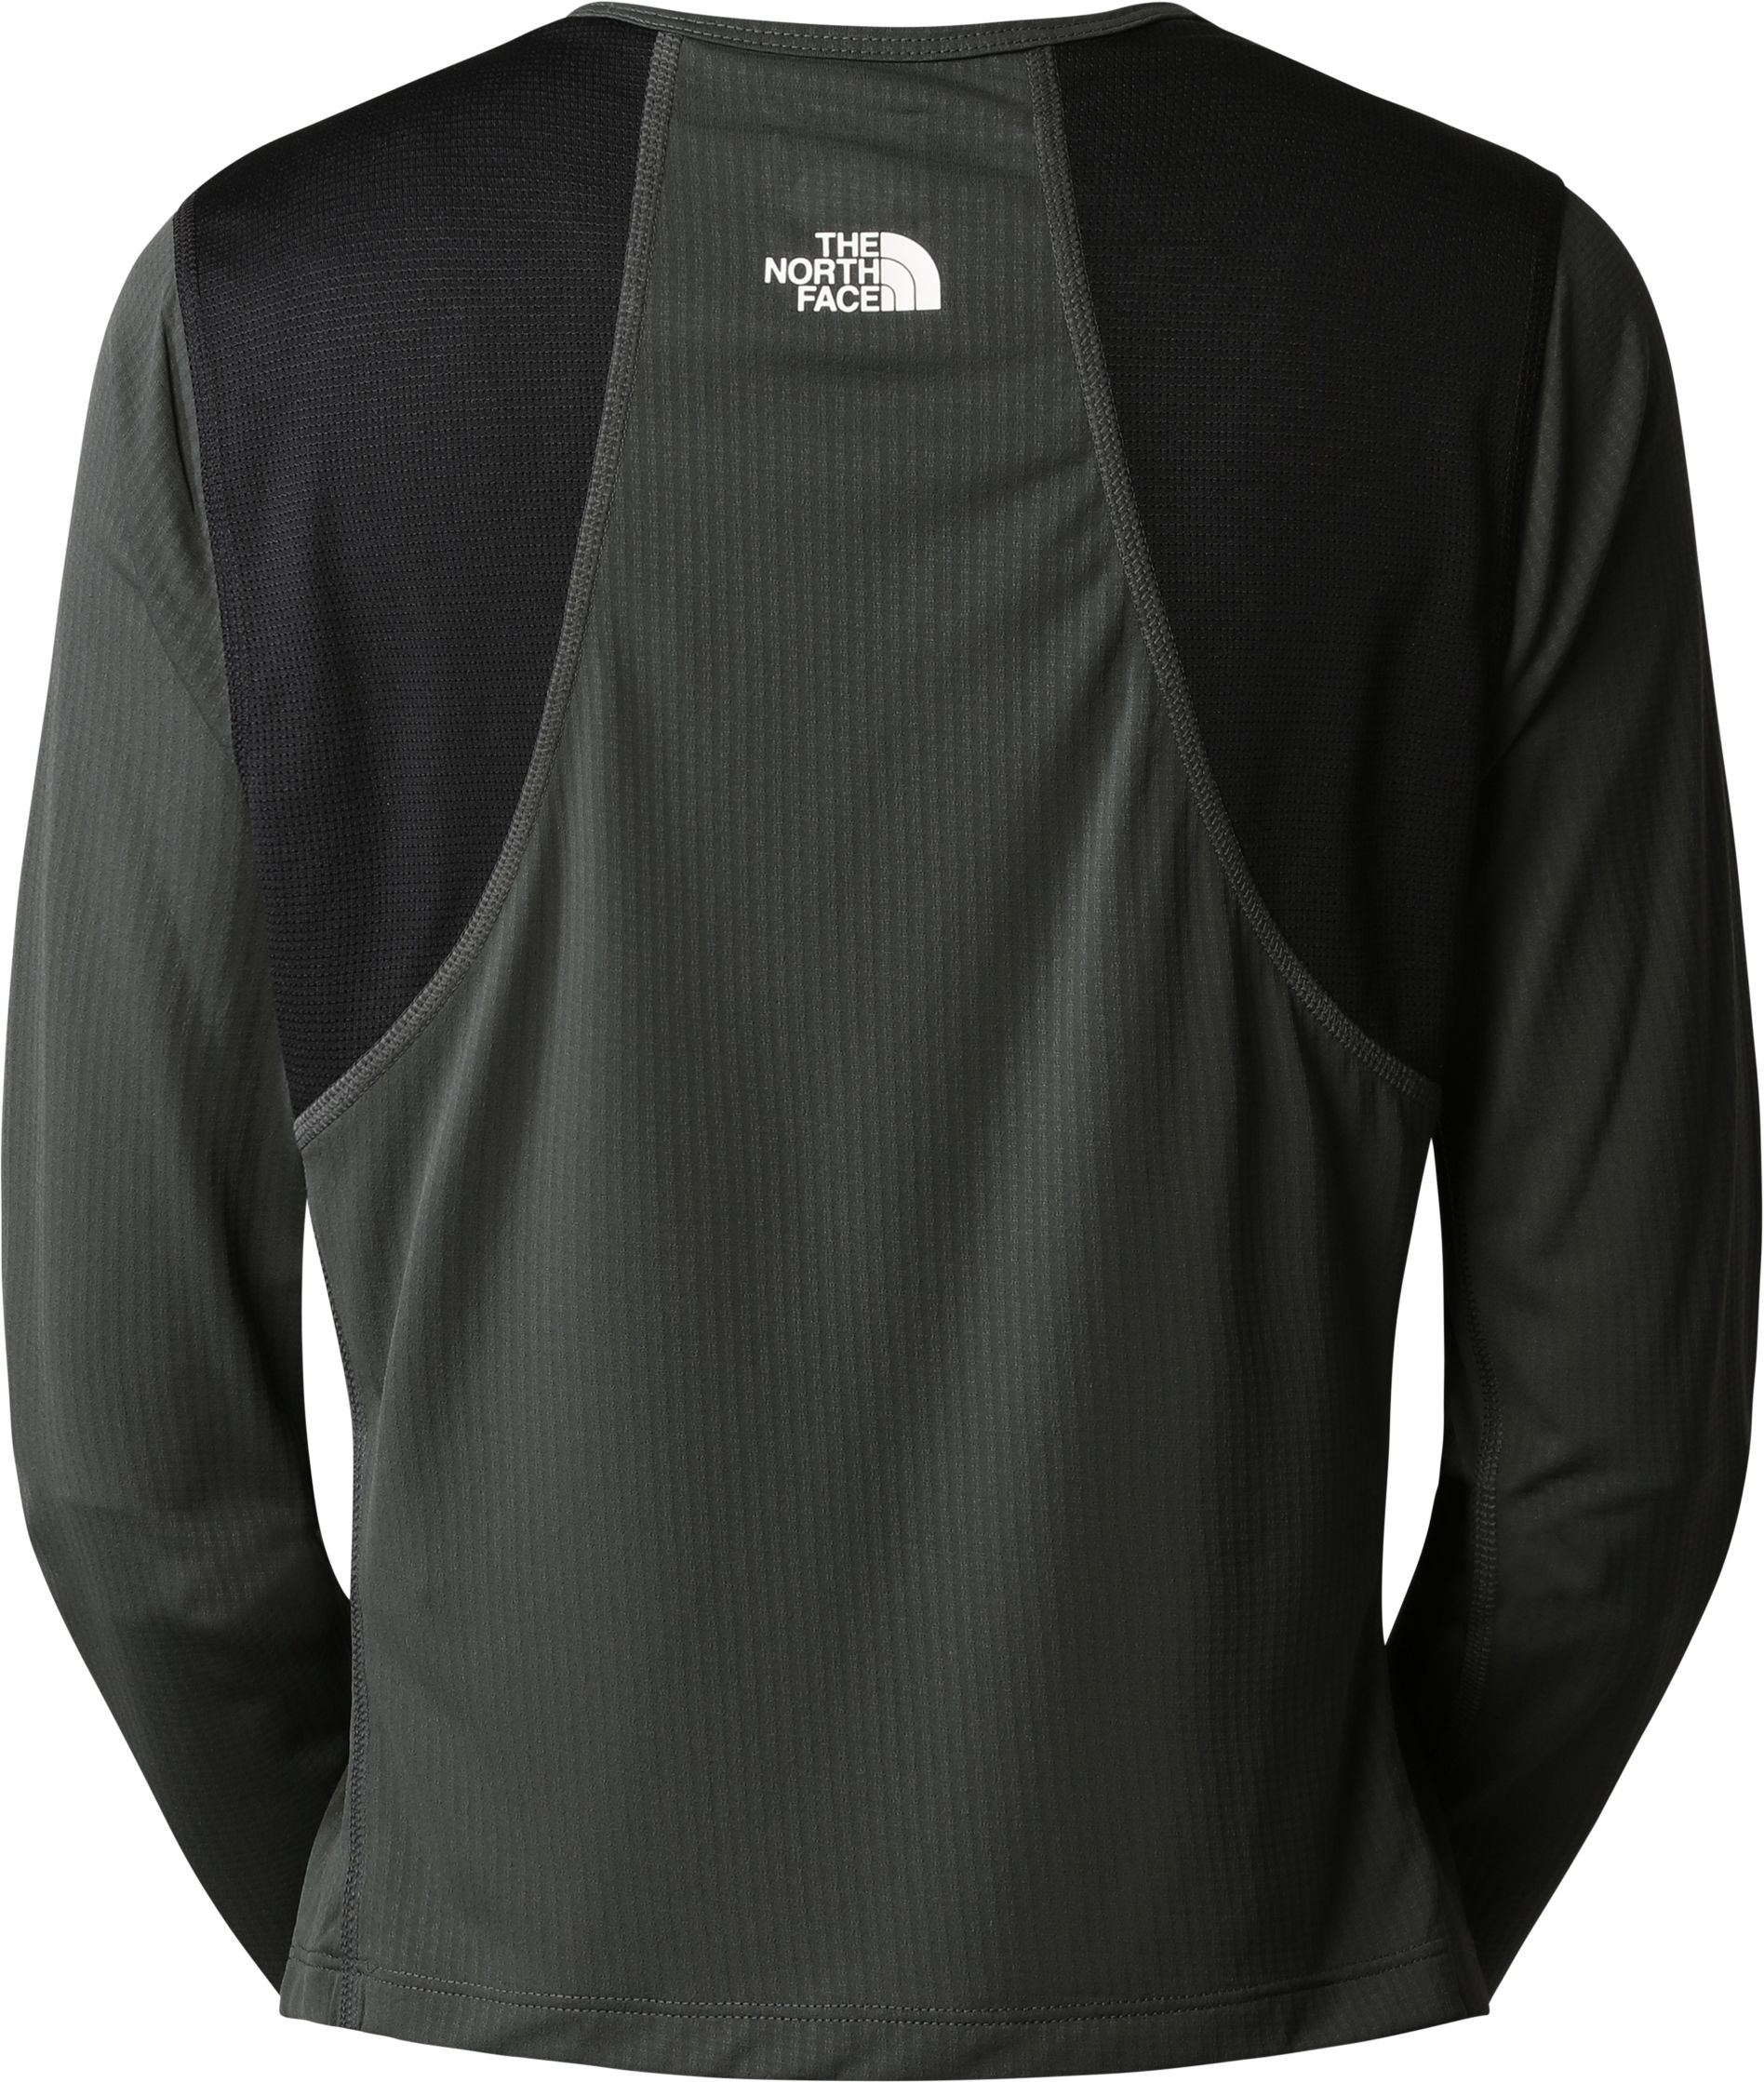 THE NORTH FACE, W LIGHTBRIGHT L/S TEE